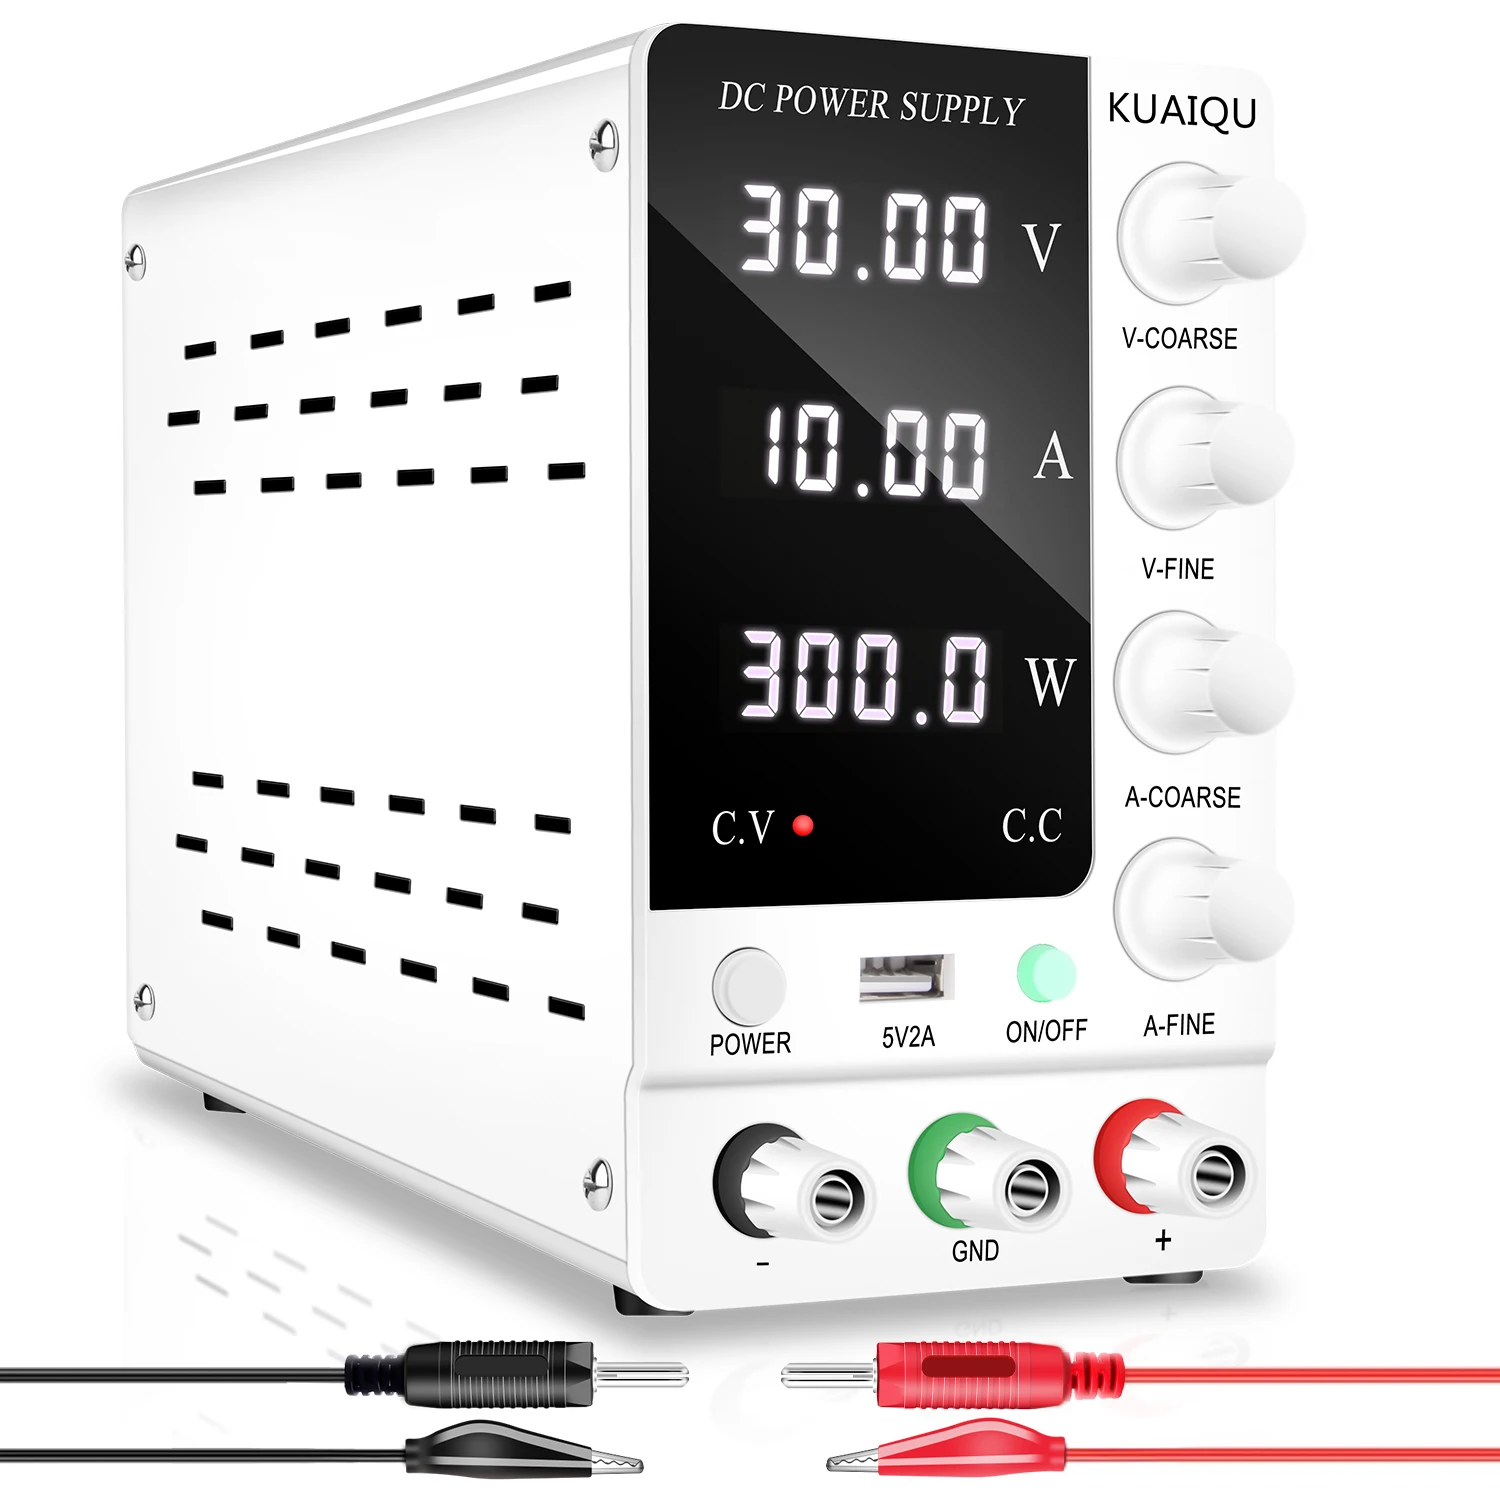 

New Arrival Kuaiqu SPS-C3010 30V 10A Adjustable High Power Switching Dc Power Supply